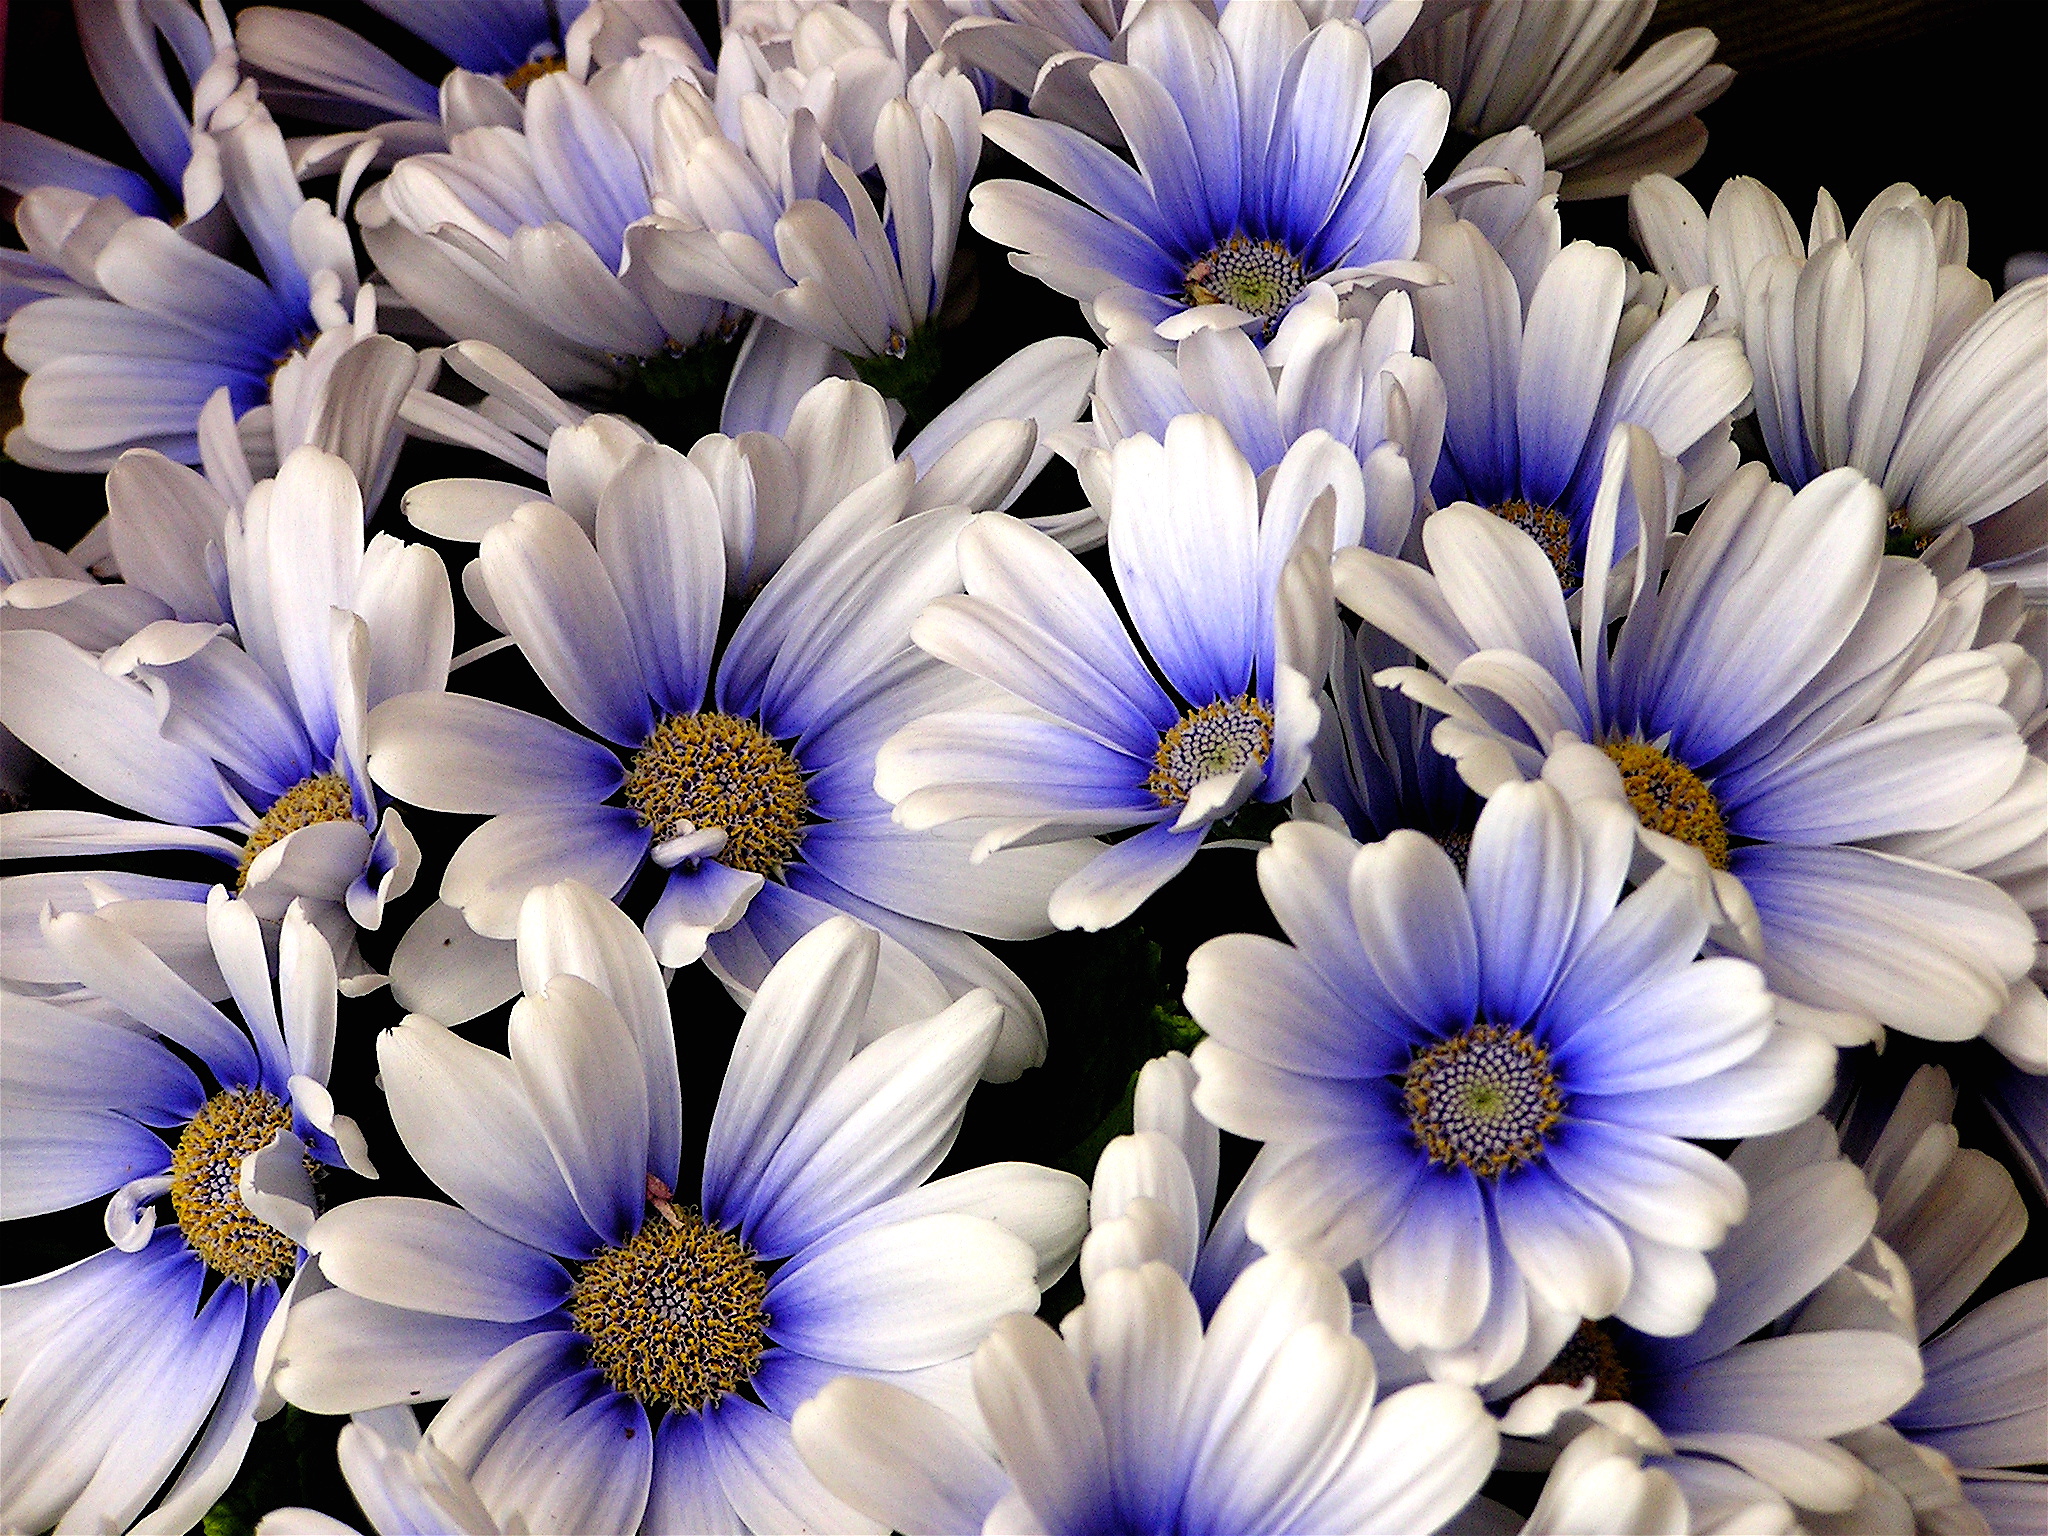 File:White and blue daisy.jpg - Wikimedia Commons